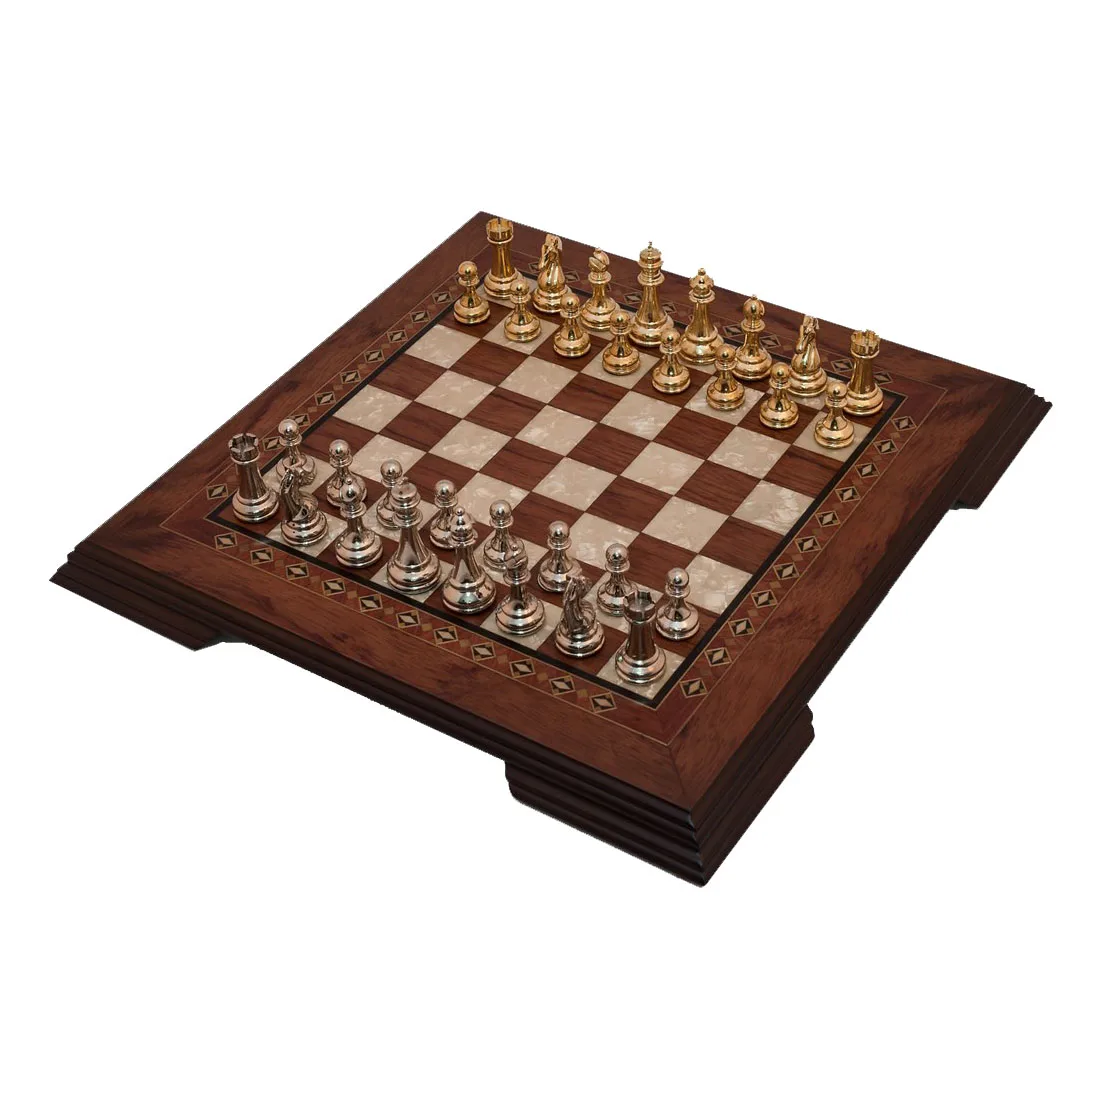 Solid Walnut Wood Chess Game Set - With Metal Figure - Footed Mosaic Engraved Chessboard Gift Items Шахматы жизнь и шахматы карпов а е